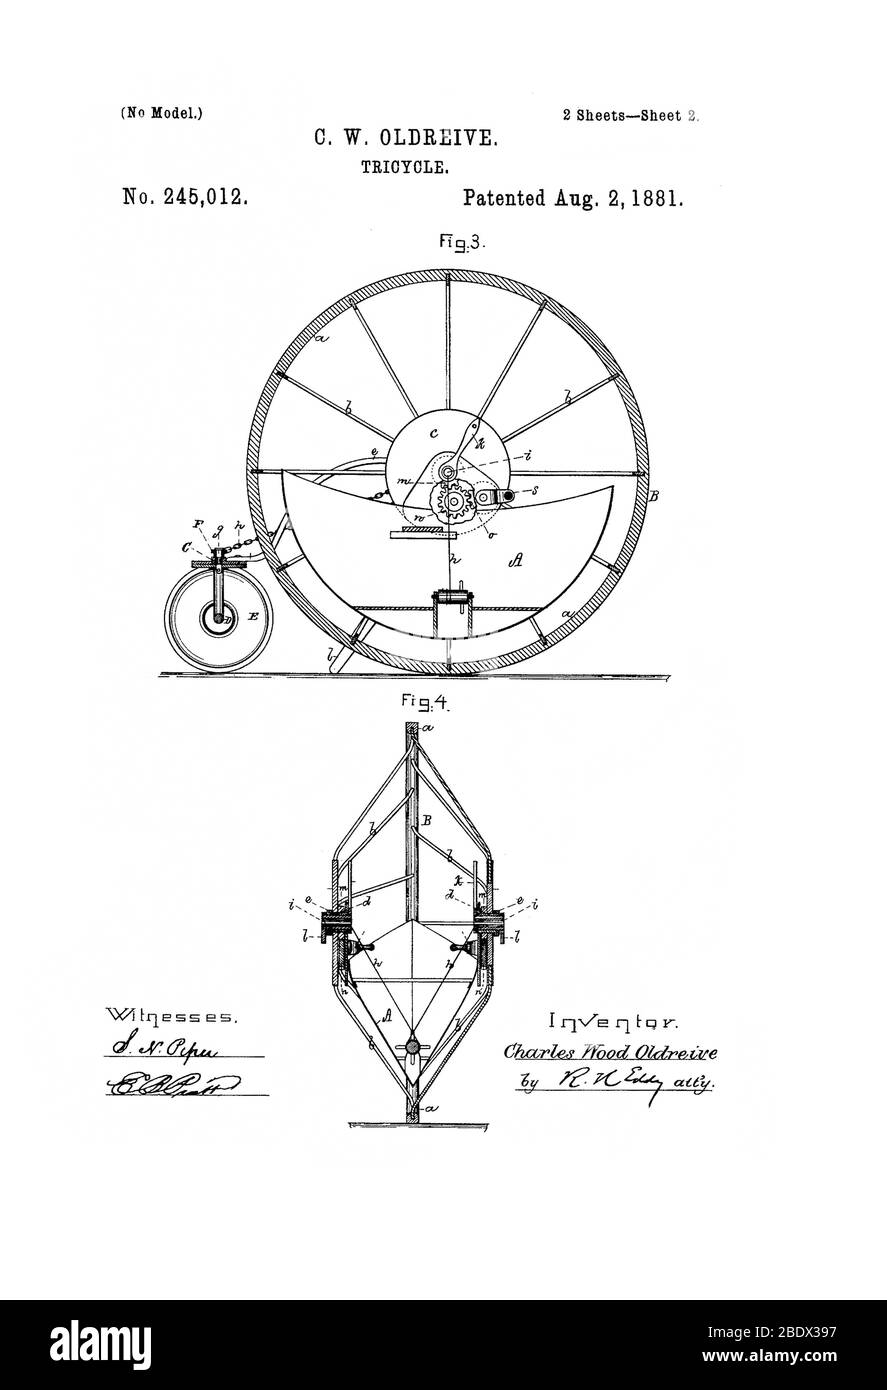 Oldreive Patent for Tricycle, 1881 Stock Photo